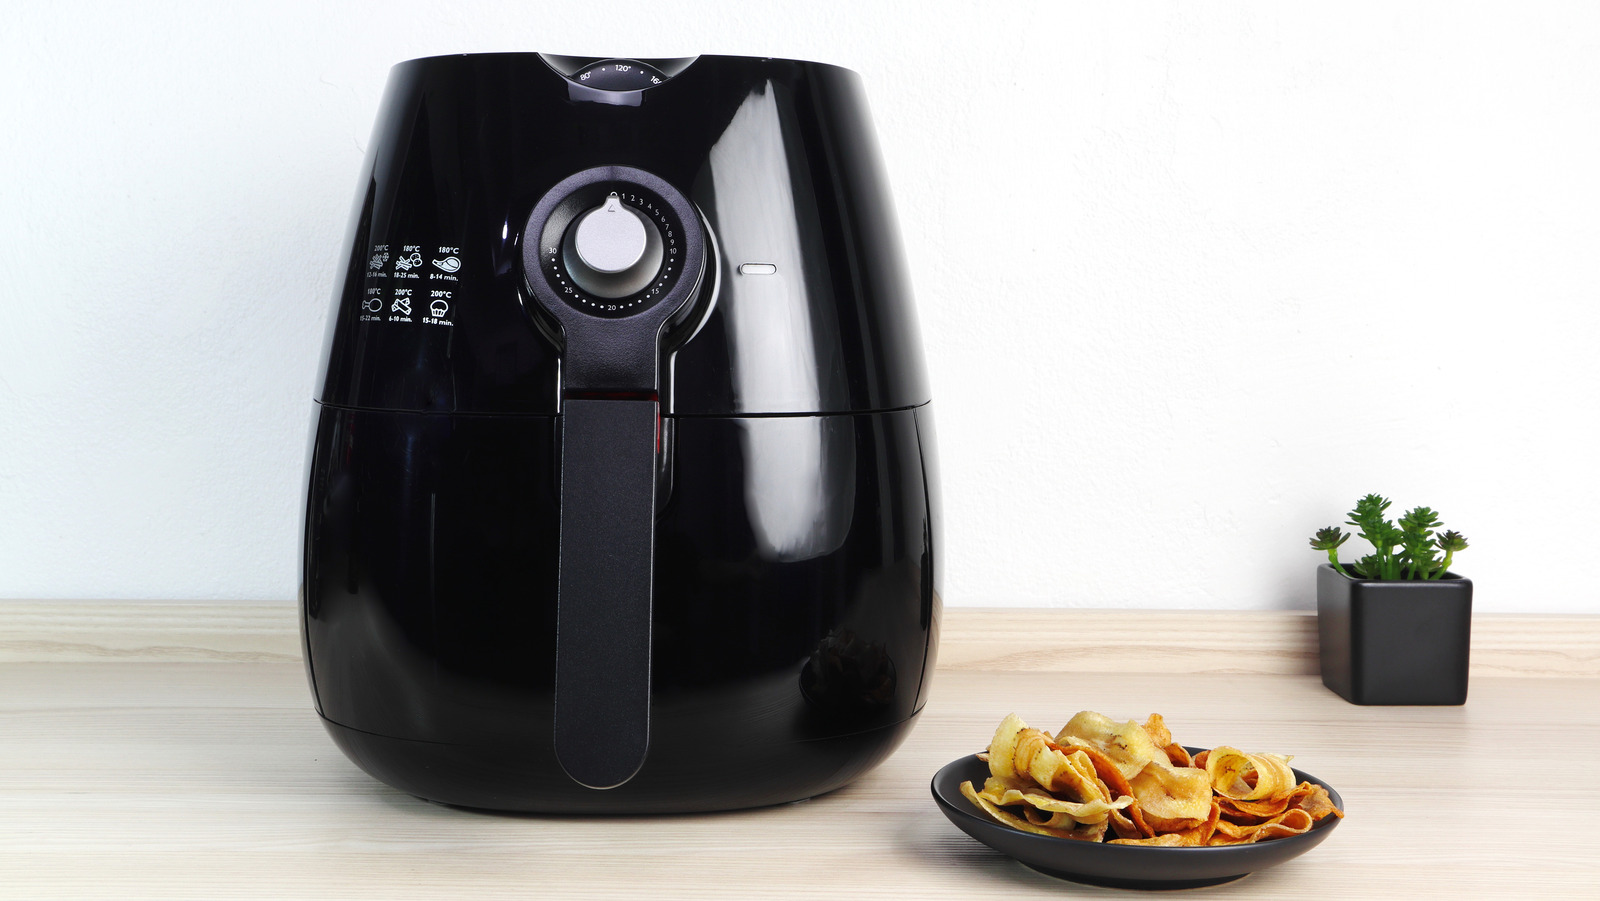 https://www.tastingtable.com/img/gallery/heres-how-to-prevent-your-air-fryer-from-smoking-from-greasy-foods/l-intro-1648061543.jpg